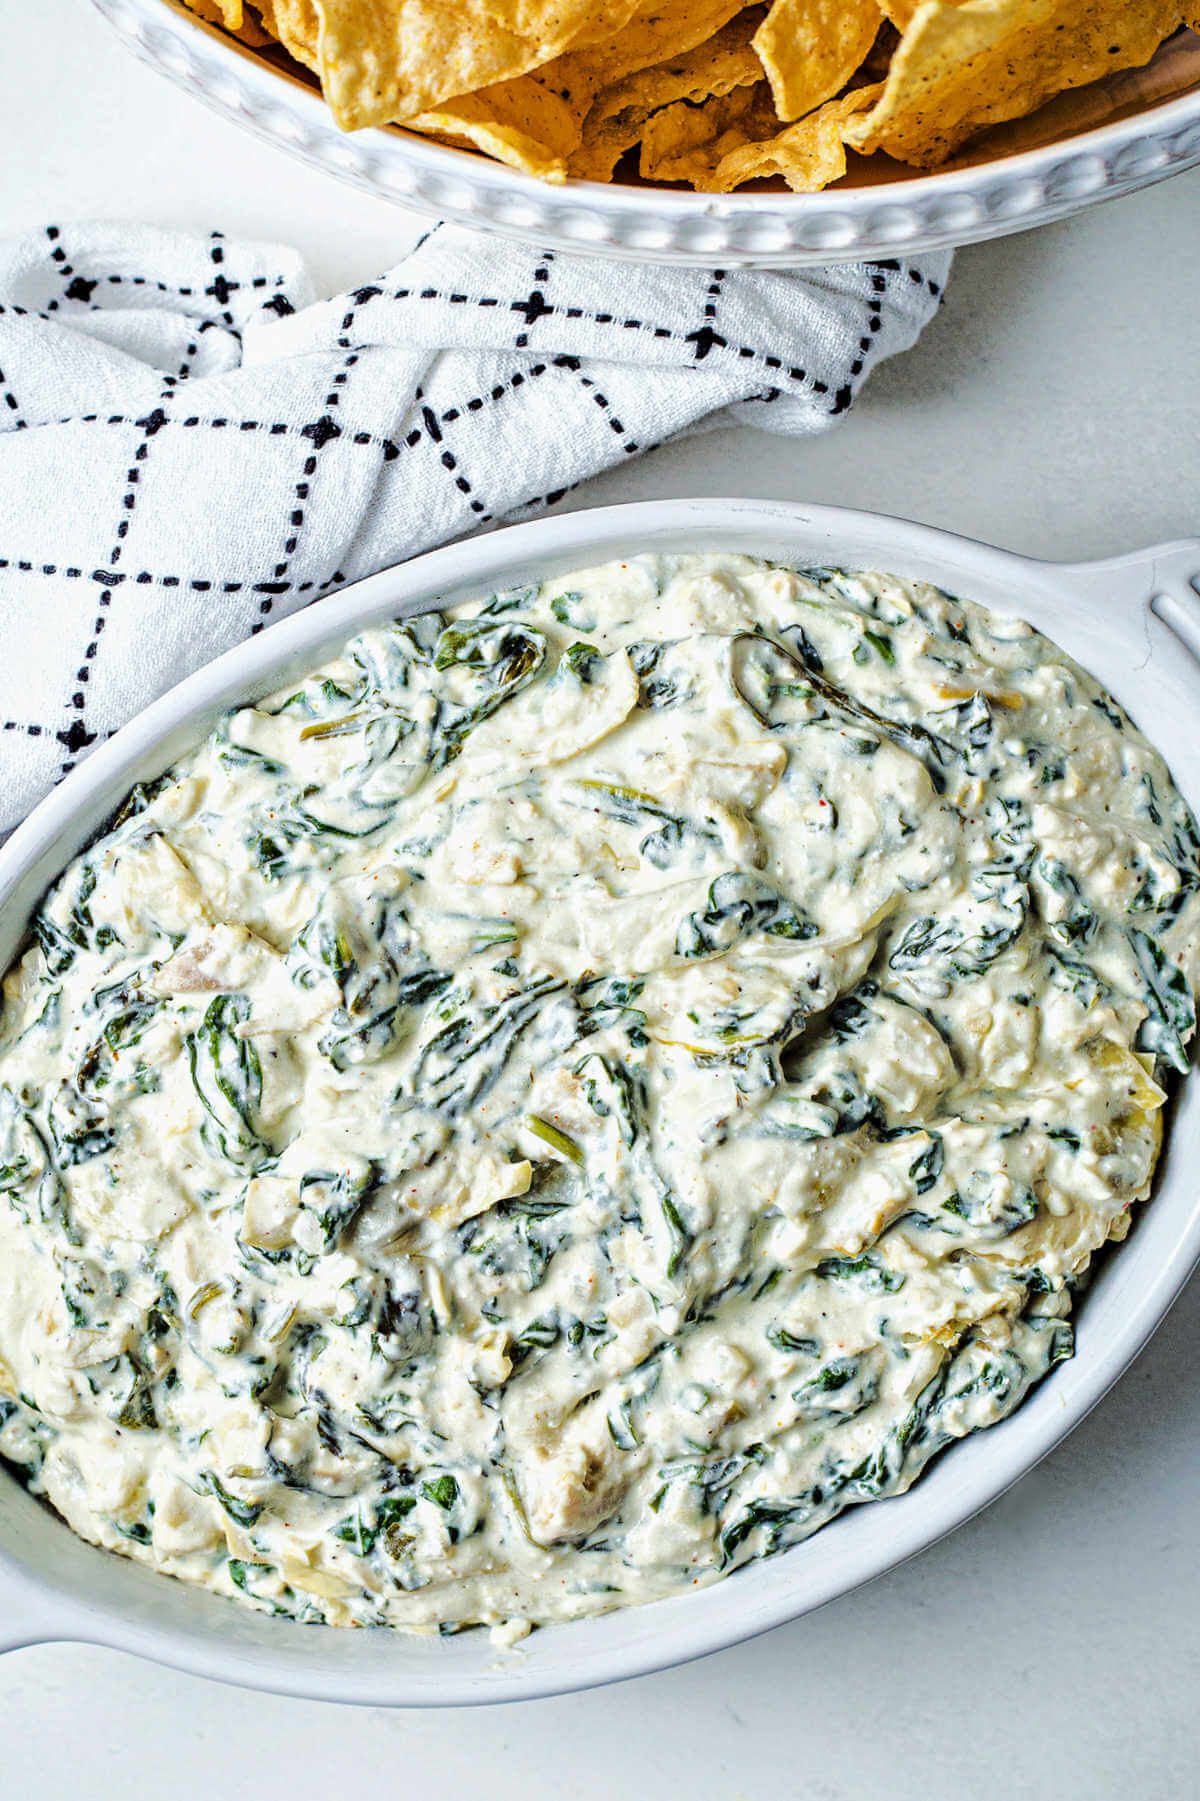 hot spinach artichoke dip in a baking dish on a table with a bowl of chips.